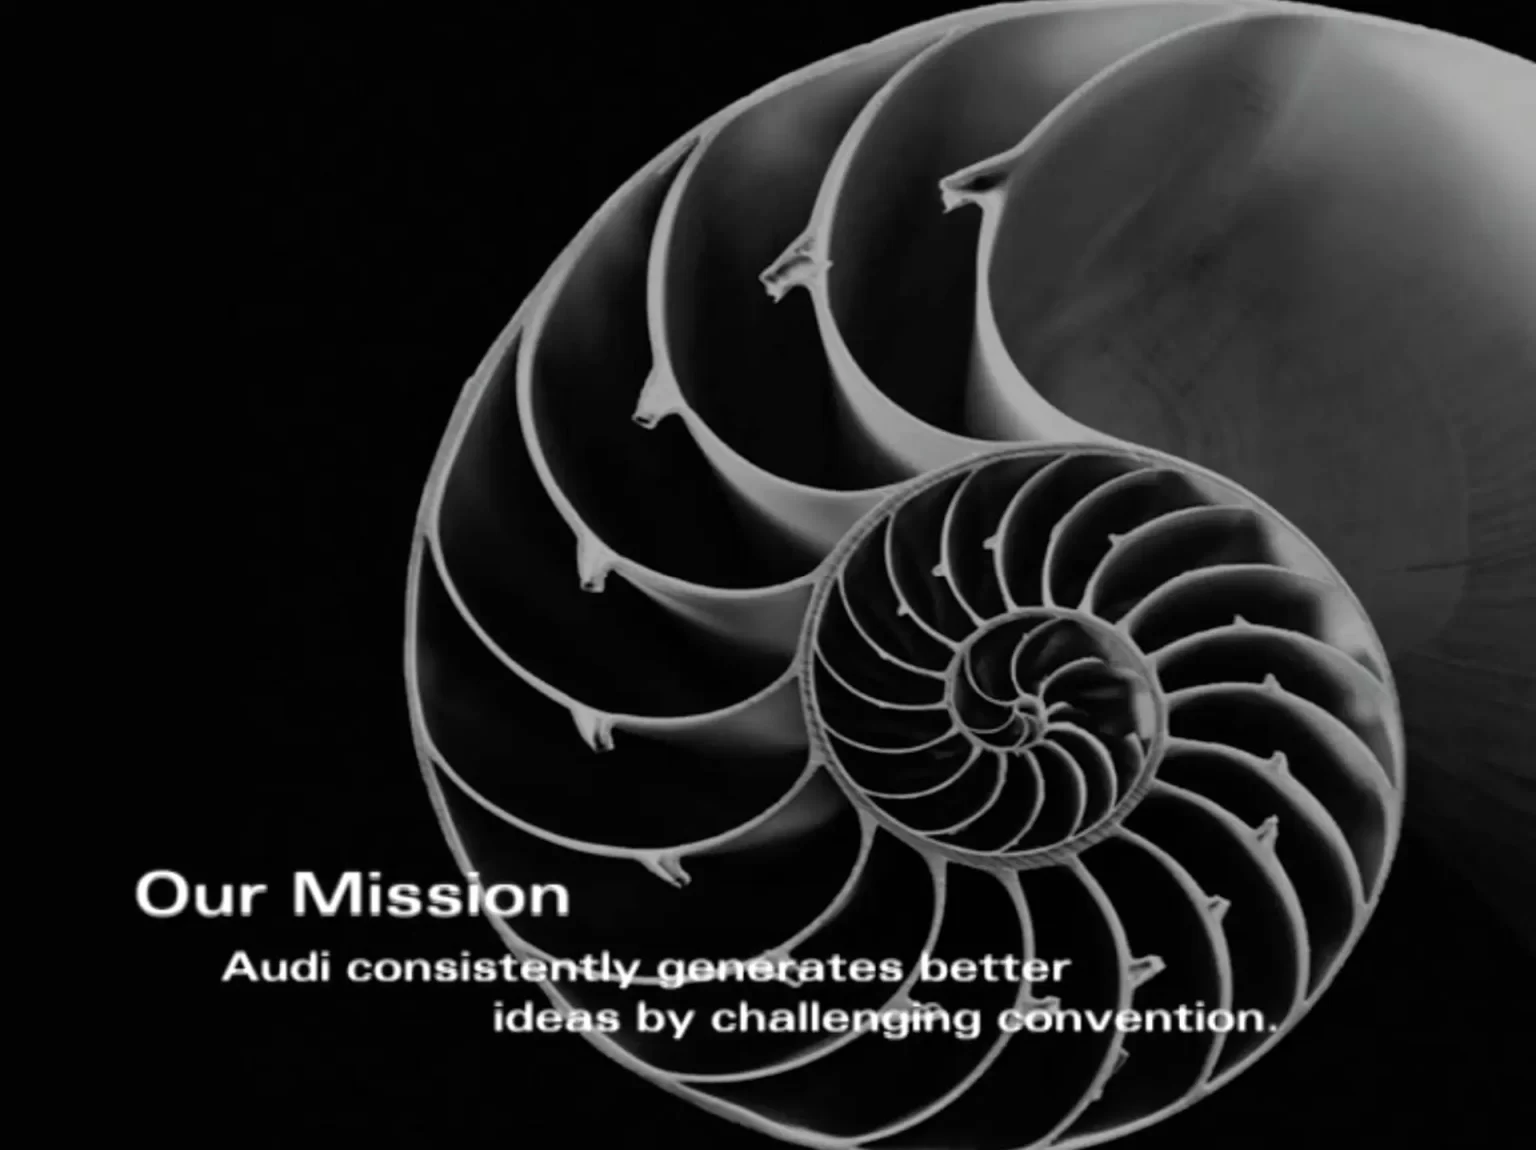 A nautilus shell with text overlay: "Our Mission - Audi consistently generates better ideas by challenging convention.